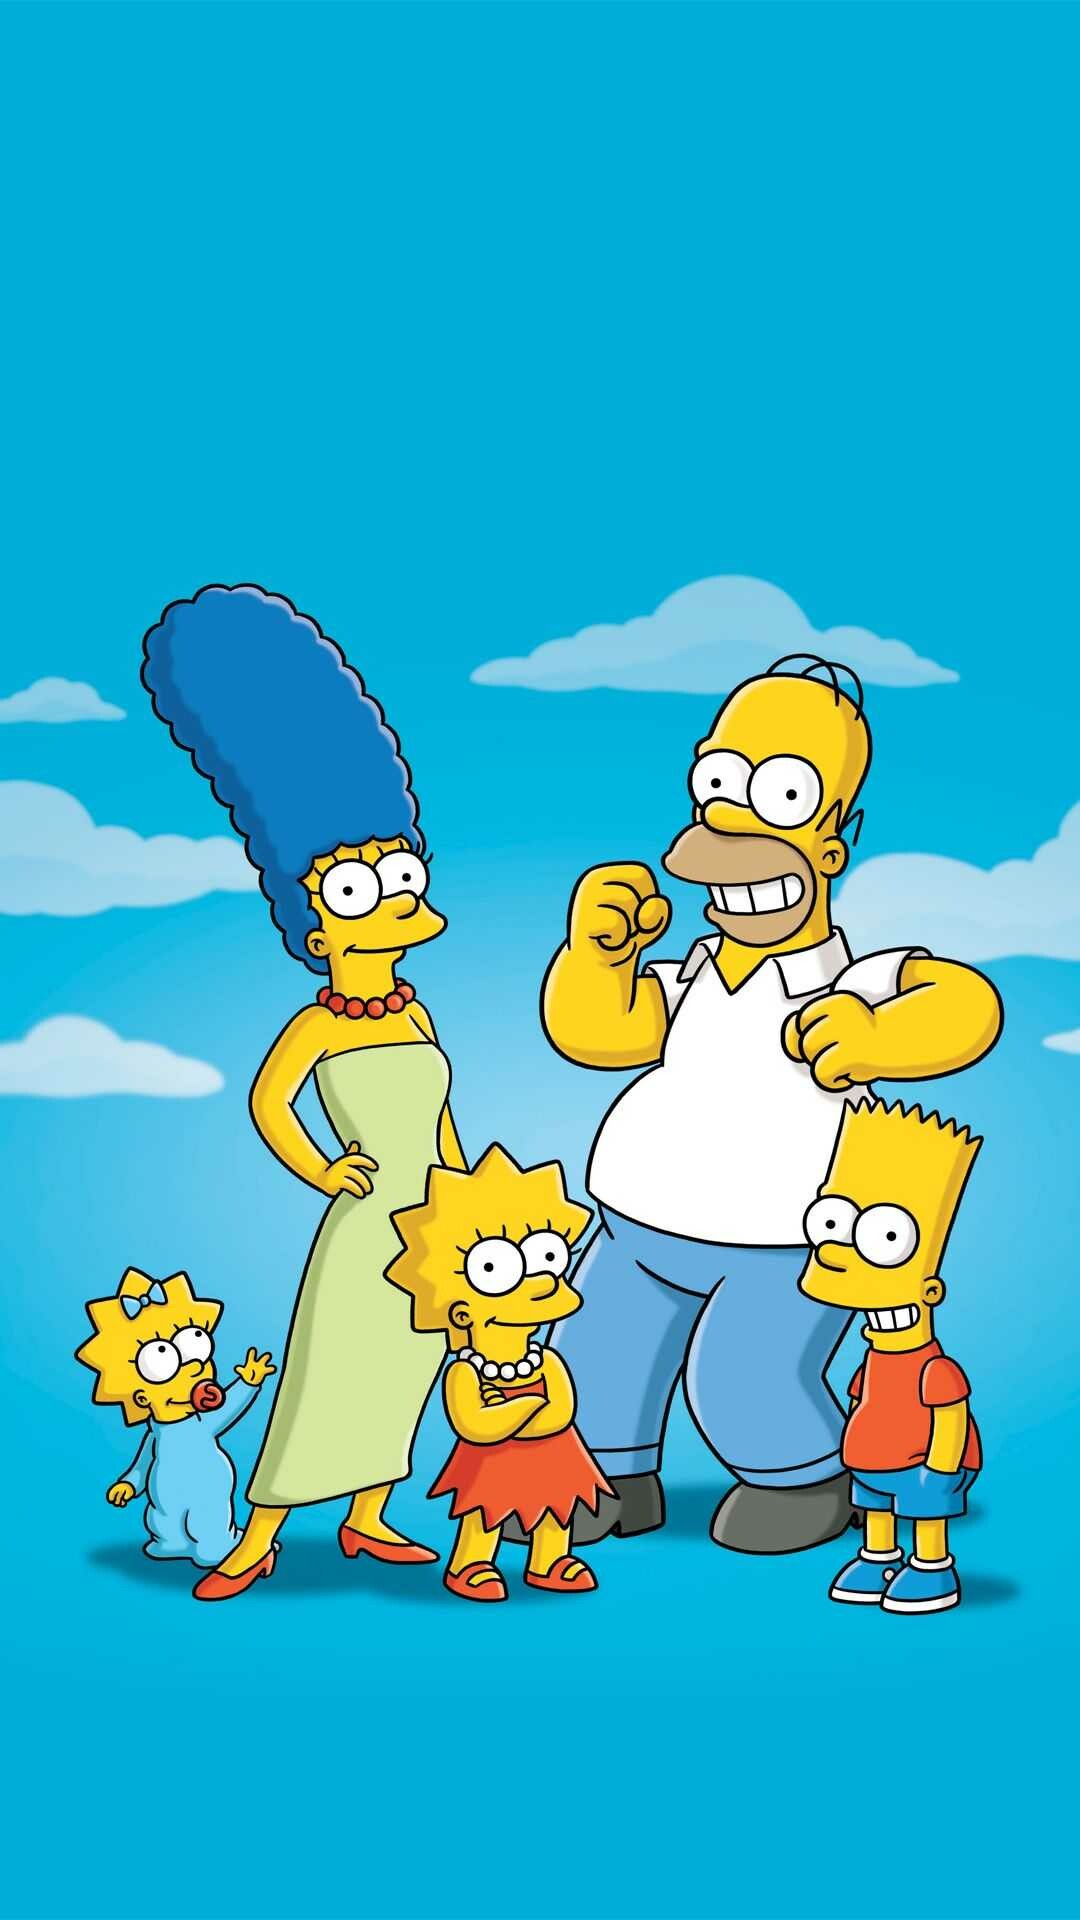 The Simpsons: A feature-length film was released in theaters worldwide on July 27, 2007. 1080x1920 Full HD Wallpaper.